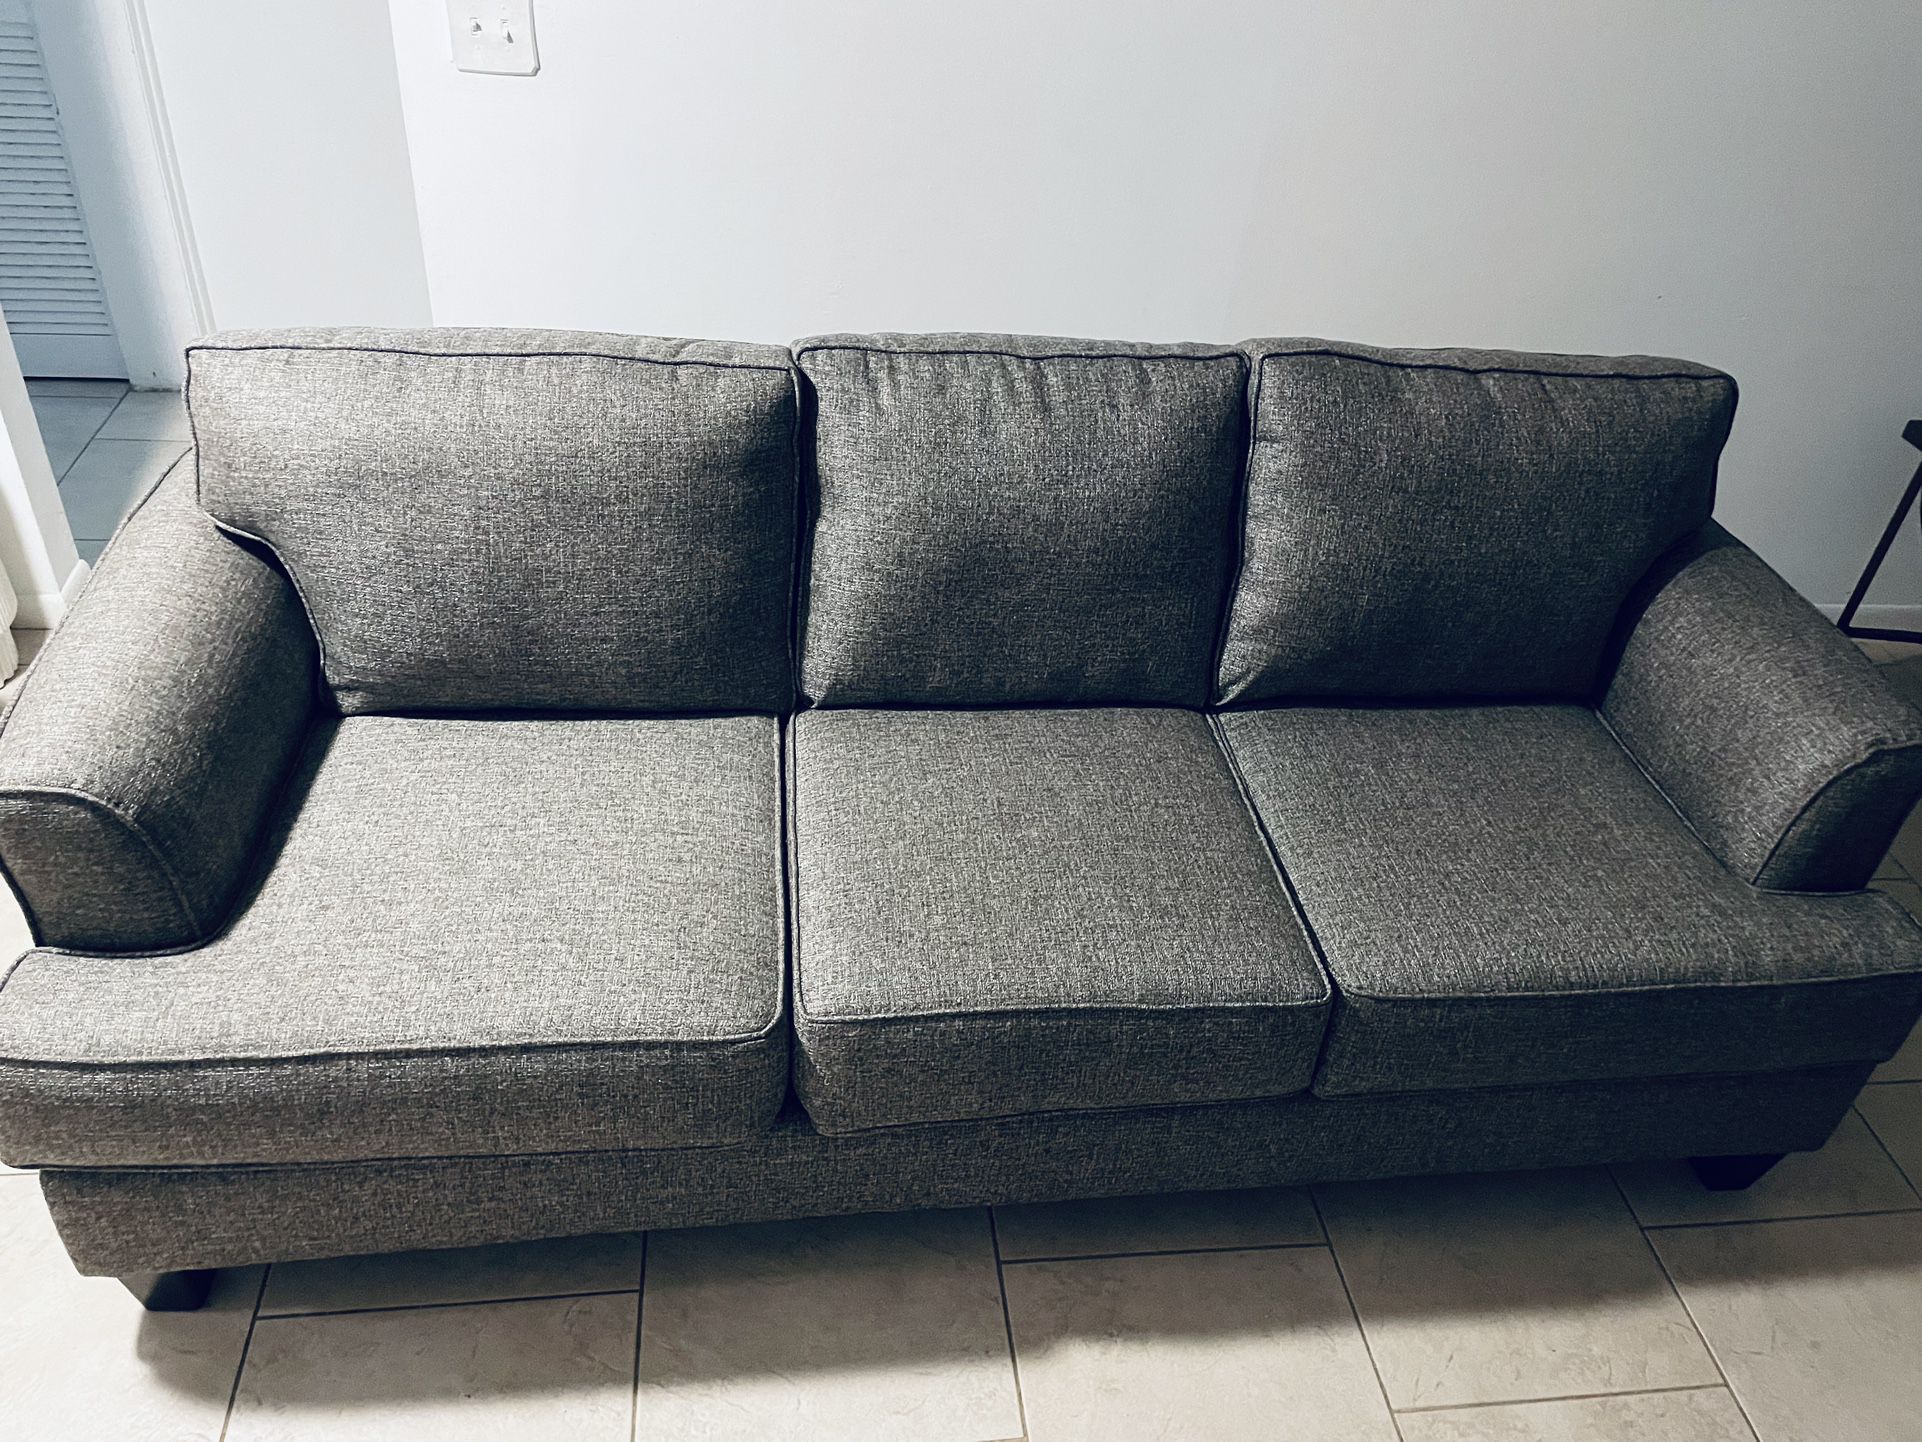 New Beautiful Couch And Loveseat